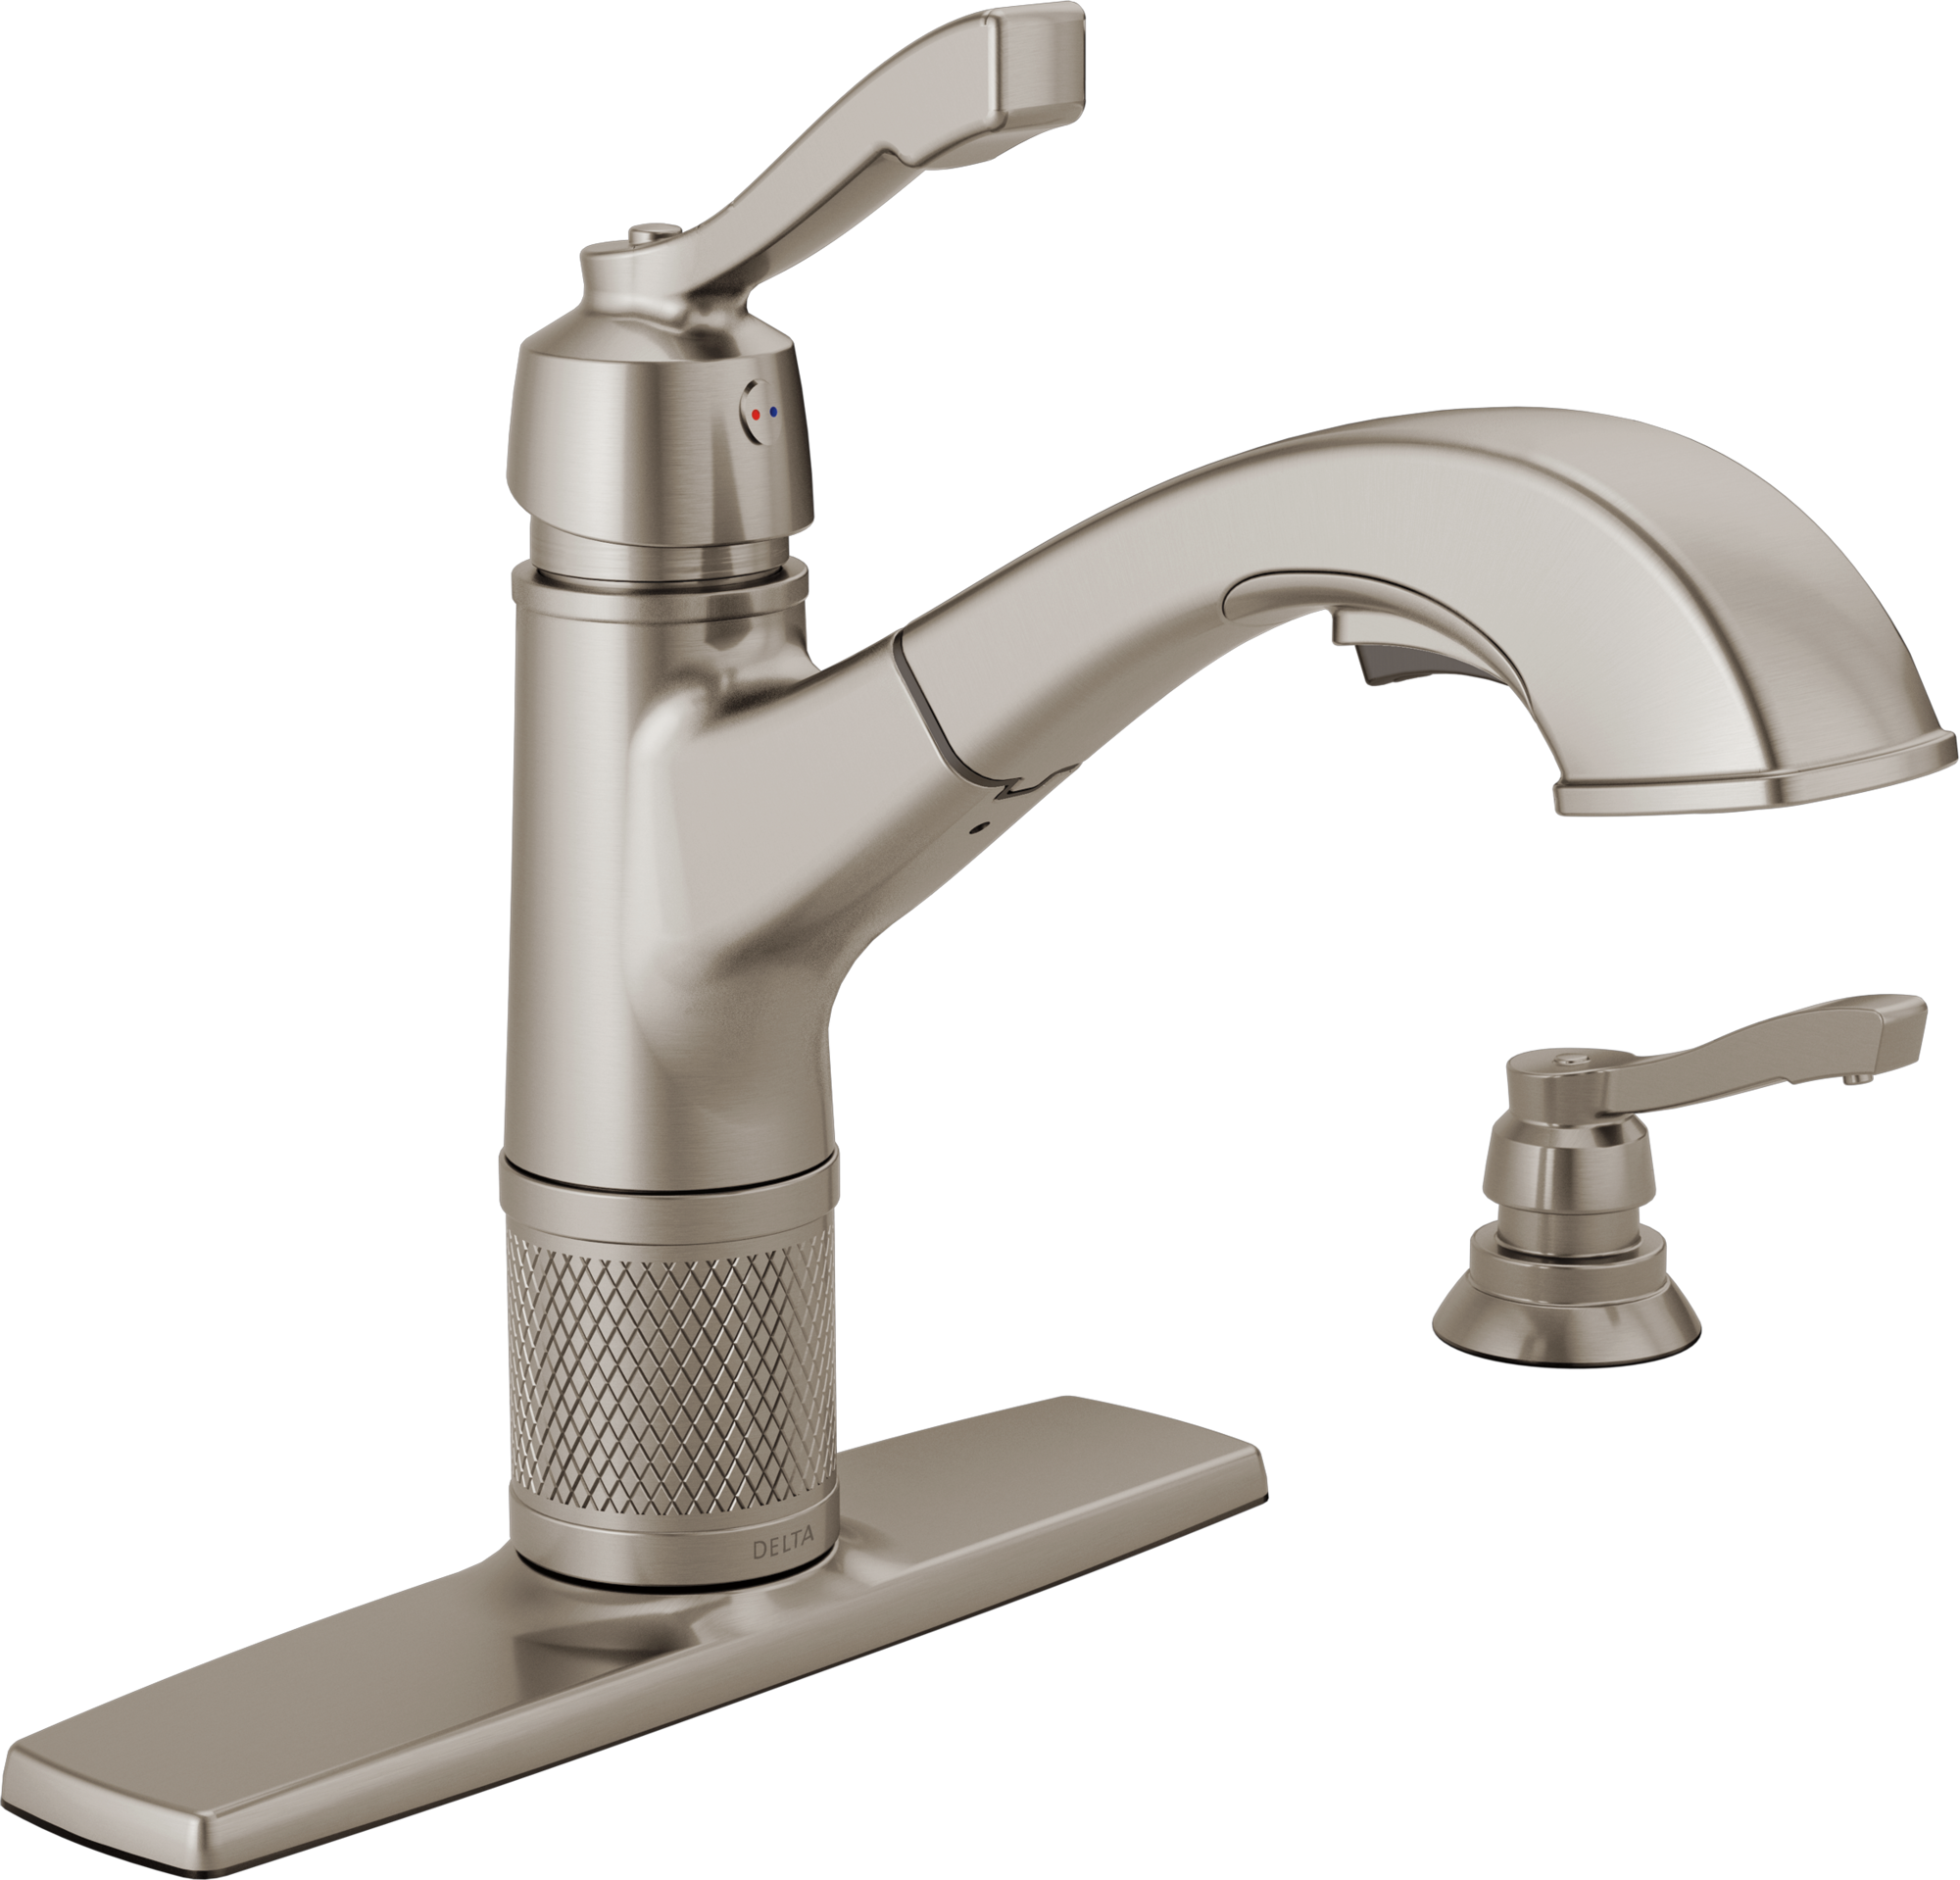 Delta Allentown Single Handle Pullout Kitchen Faucet Certified Refurbished